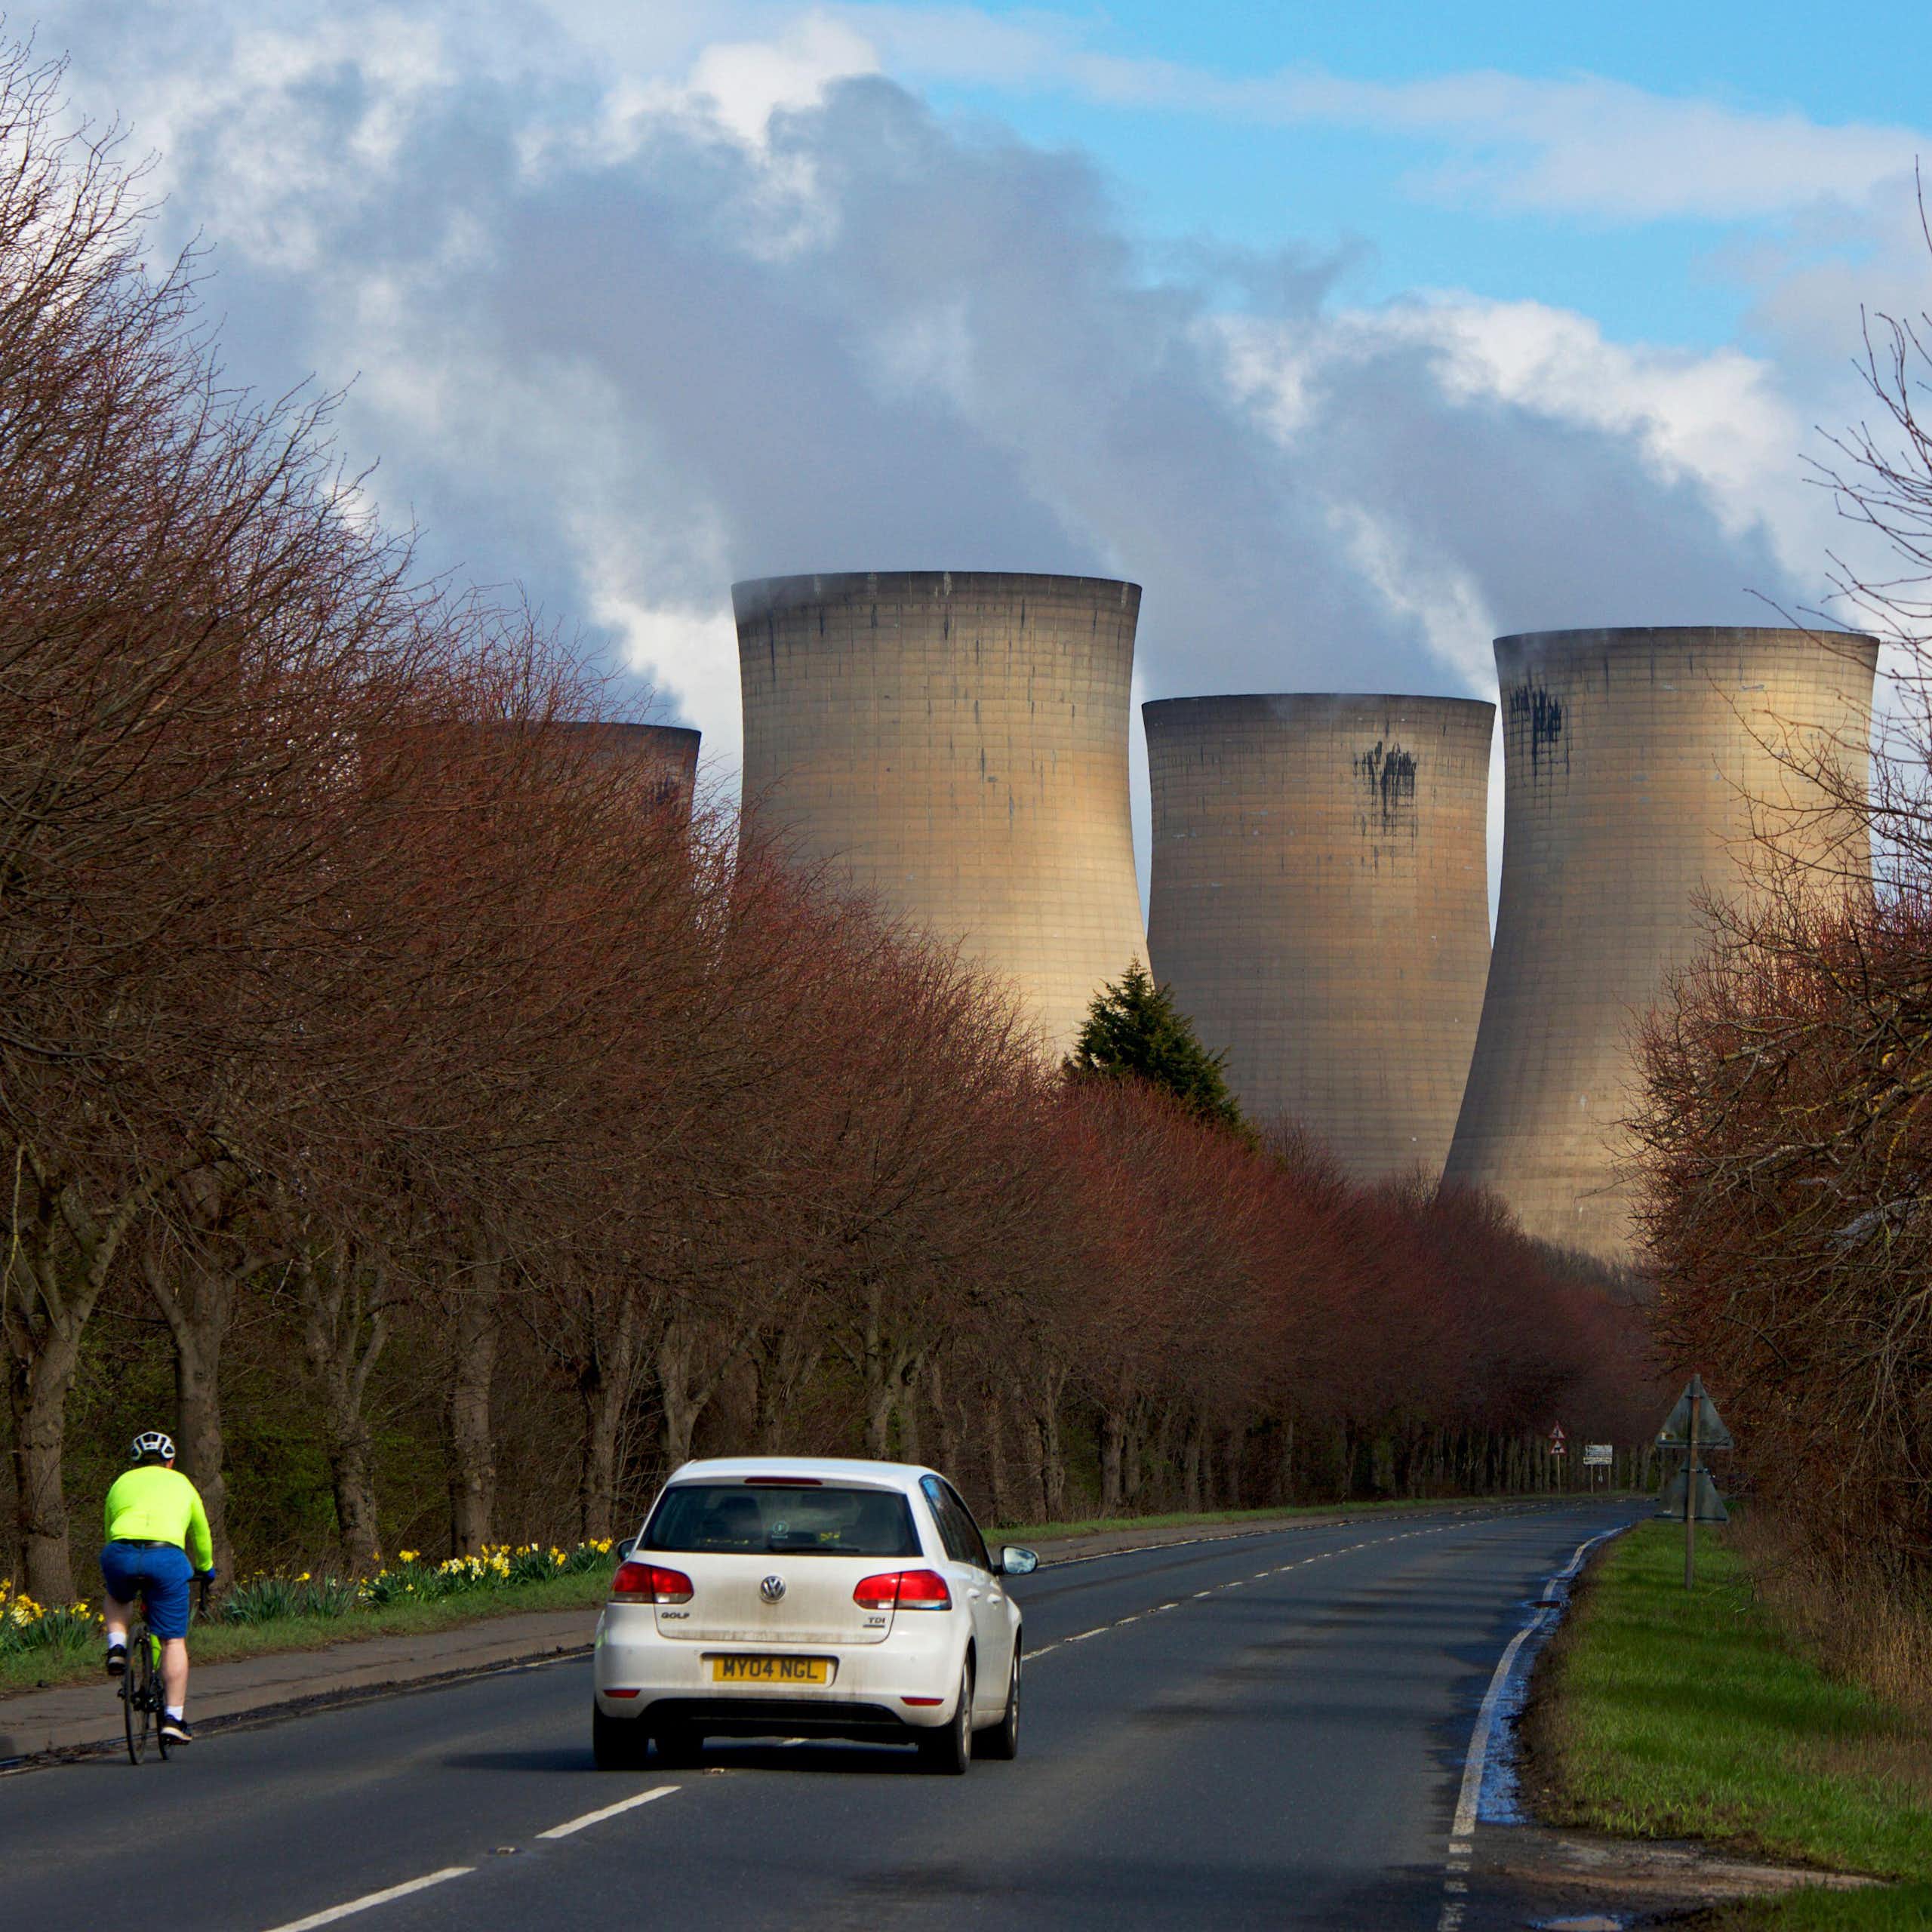 A cyclist and car on a road leading to a power station.